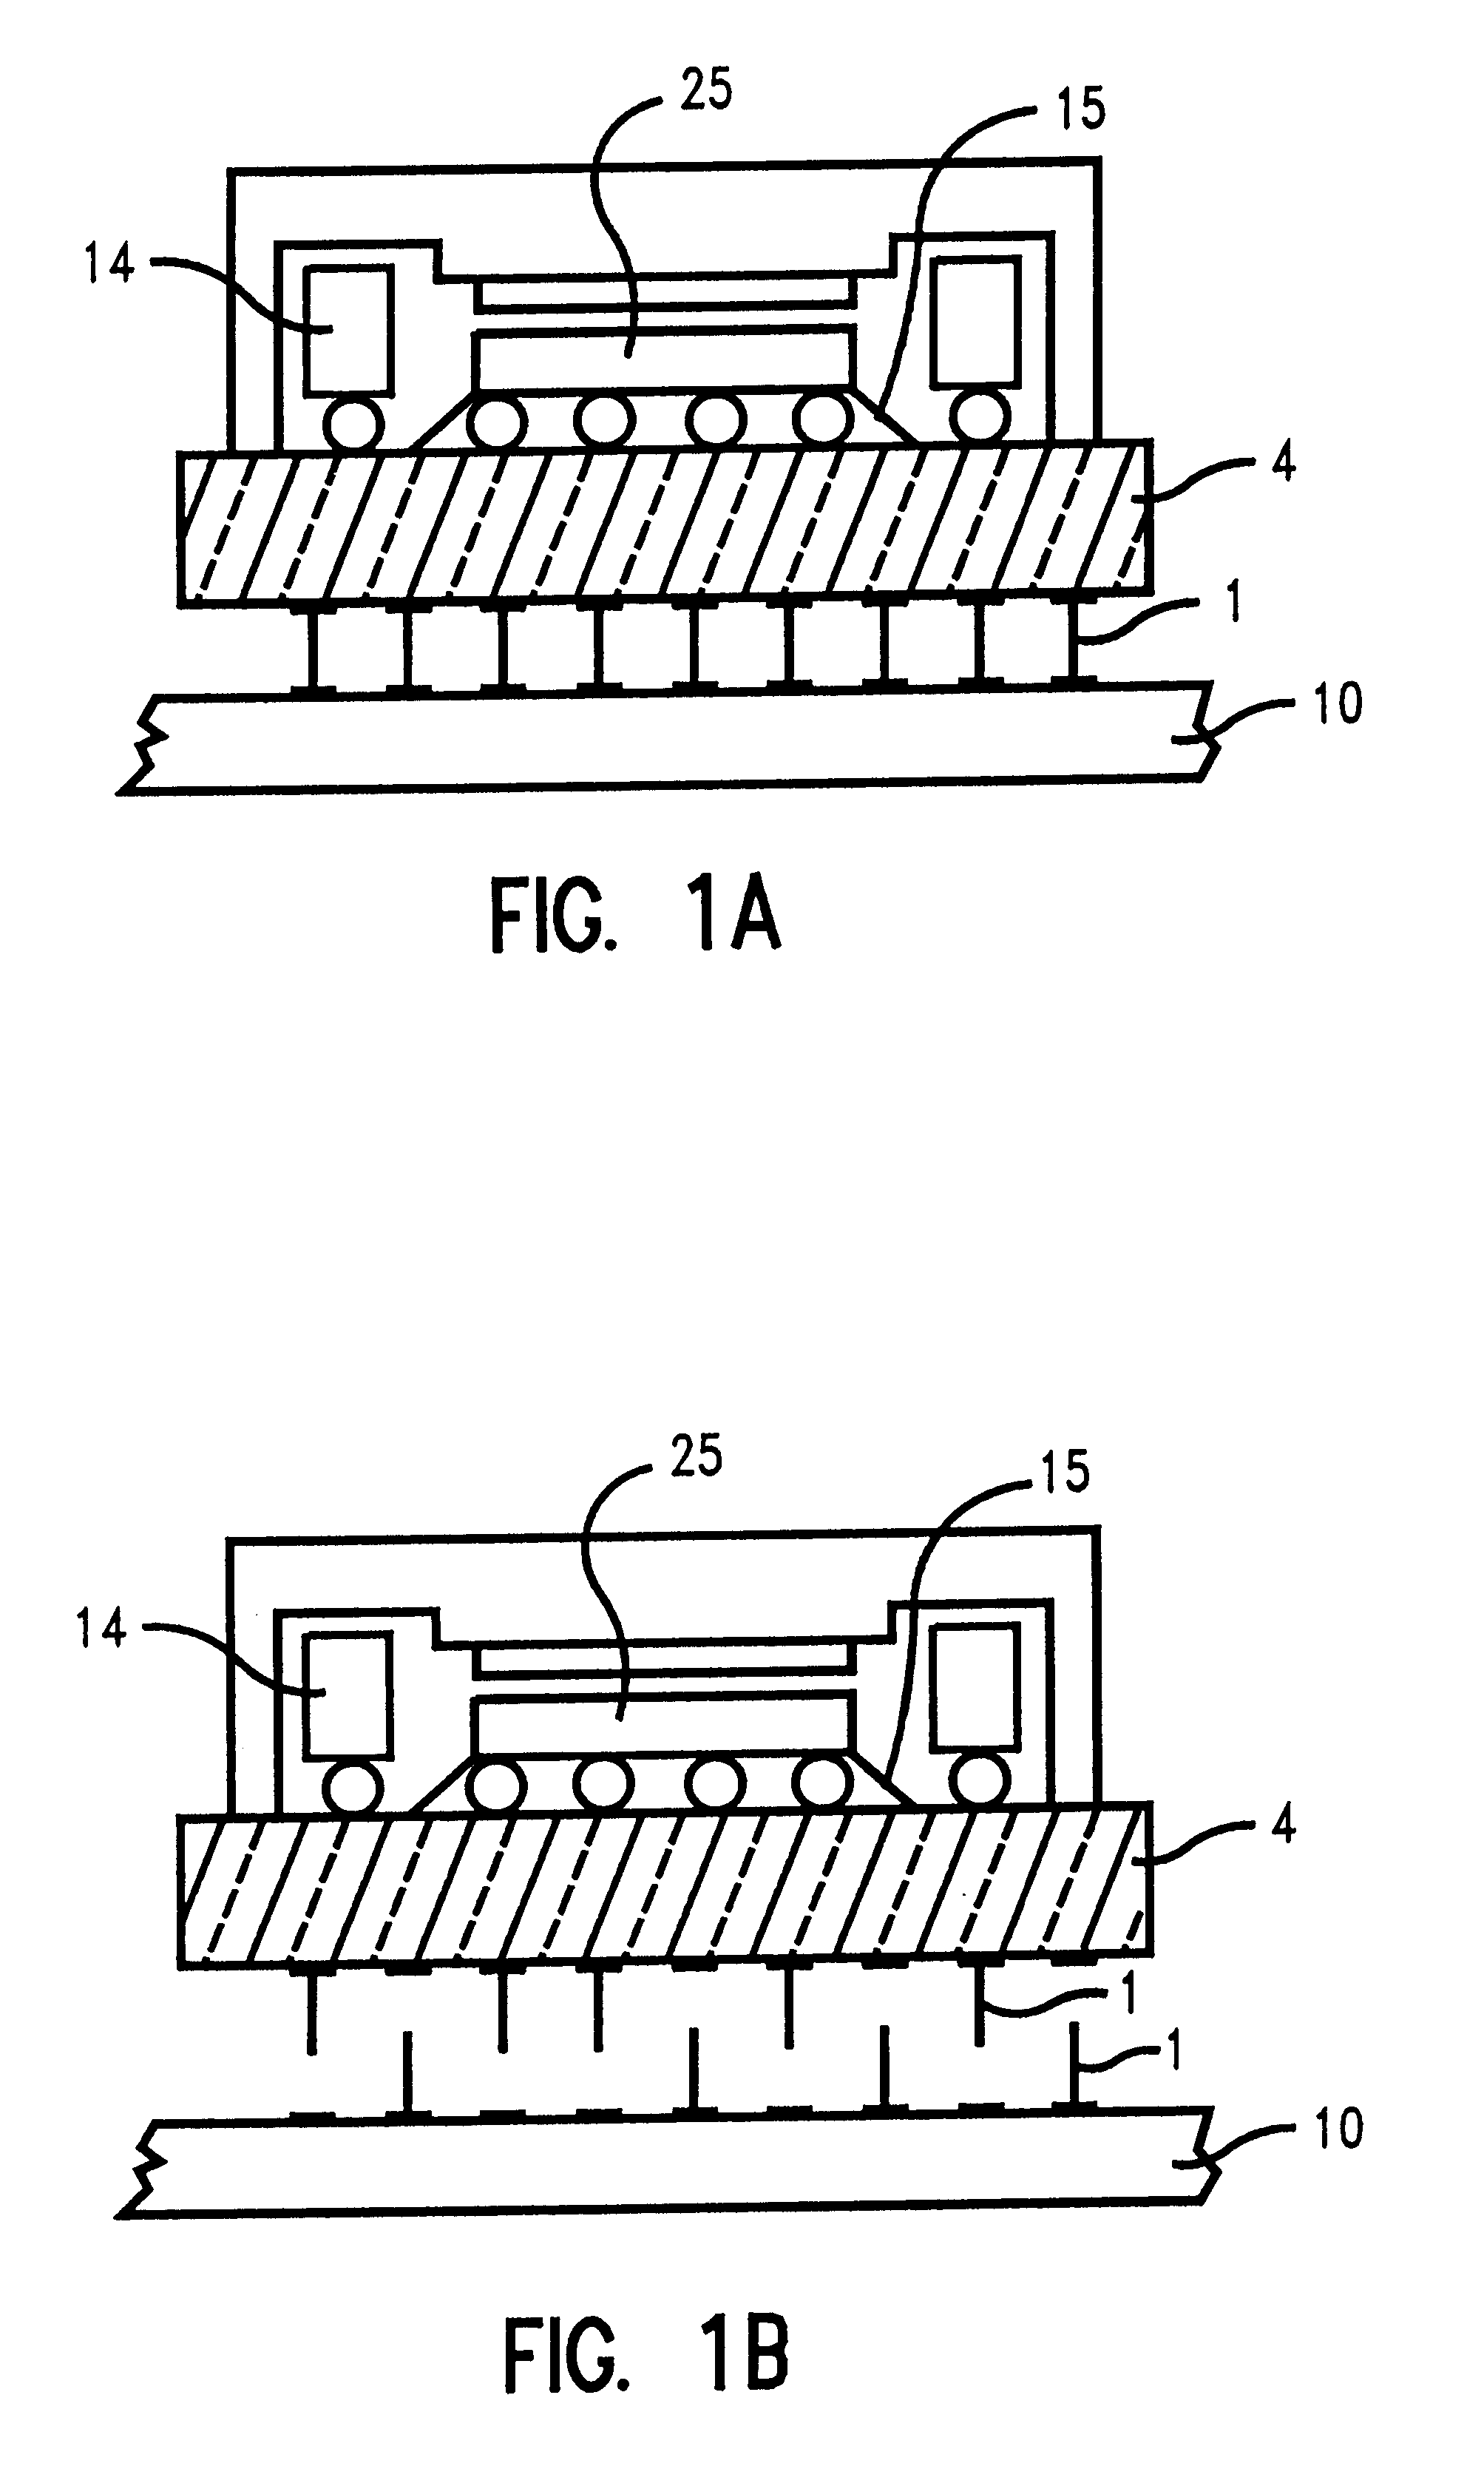 Interconnection structure and process module assembly and rework